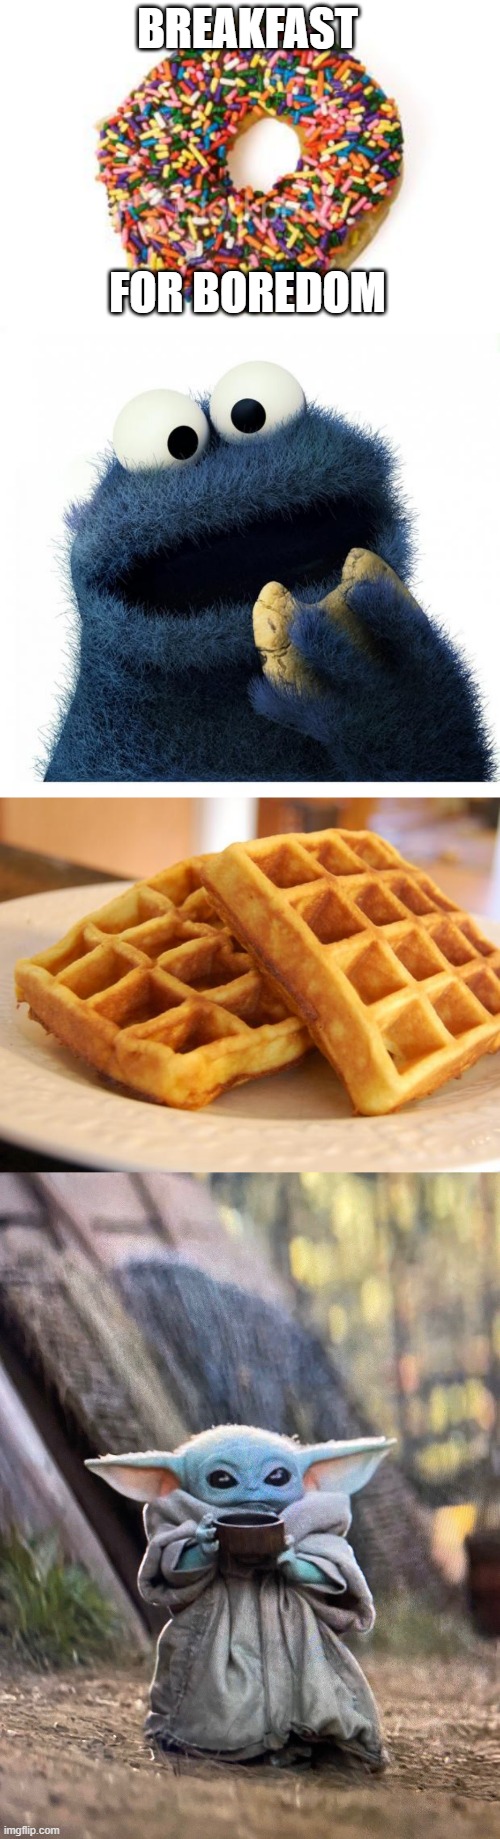 breakfast for boredom | BREAKFAST; FOR BOREDOM | image tagged in donut,cookie monster love story,essay waffle,baby yoda tea | made w/ Imgflip meme maker